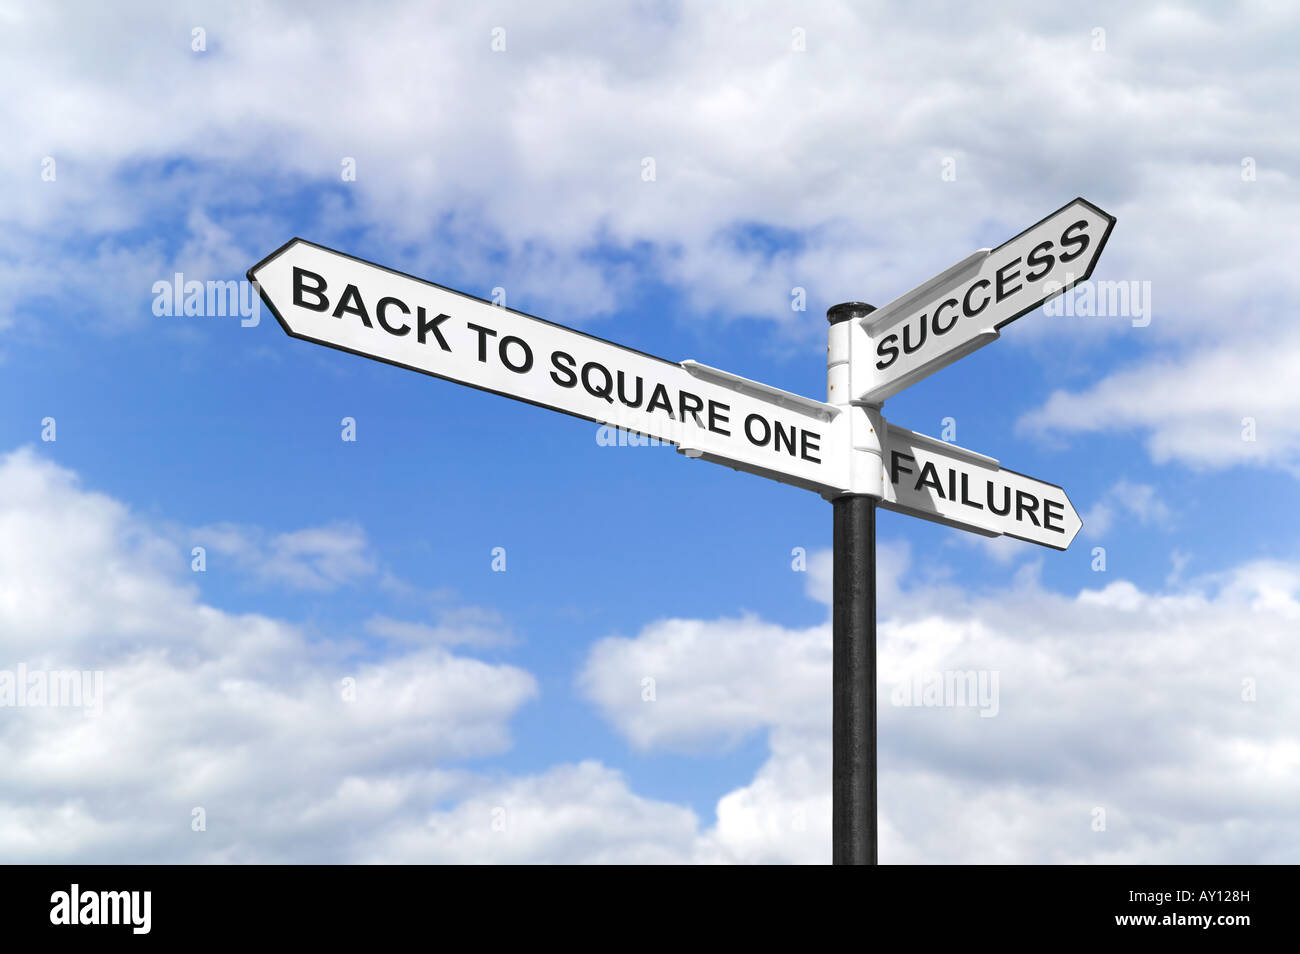 Concept image of a signpost with Back to Square One Success and Failure against a blue cloudy sky Stock Photo